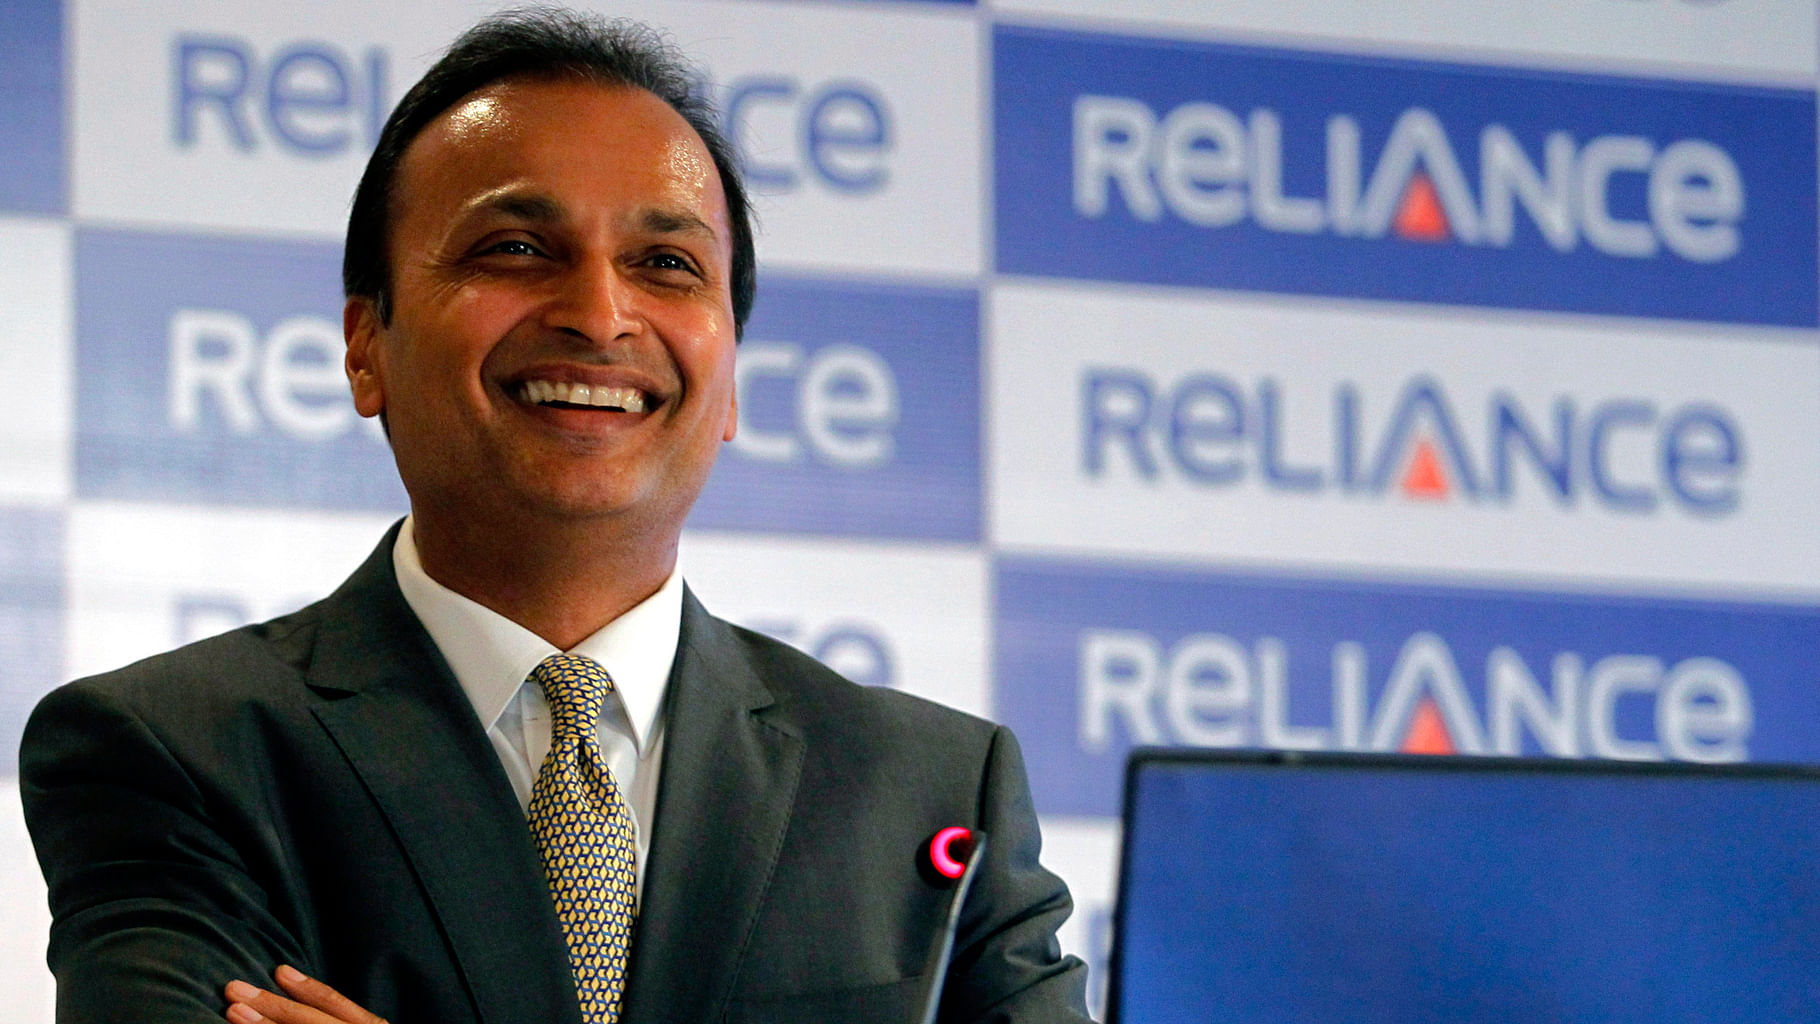 A report has revealed that industrialist Anil Ambani had visited the then French Defence Minister Jean-Yves Le Drian’s office in Paris in March 2015.